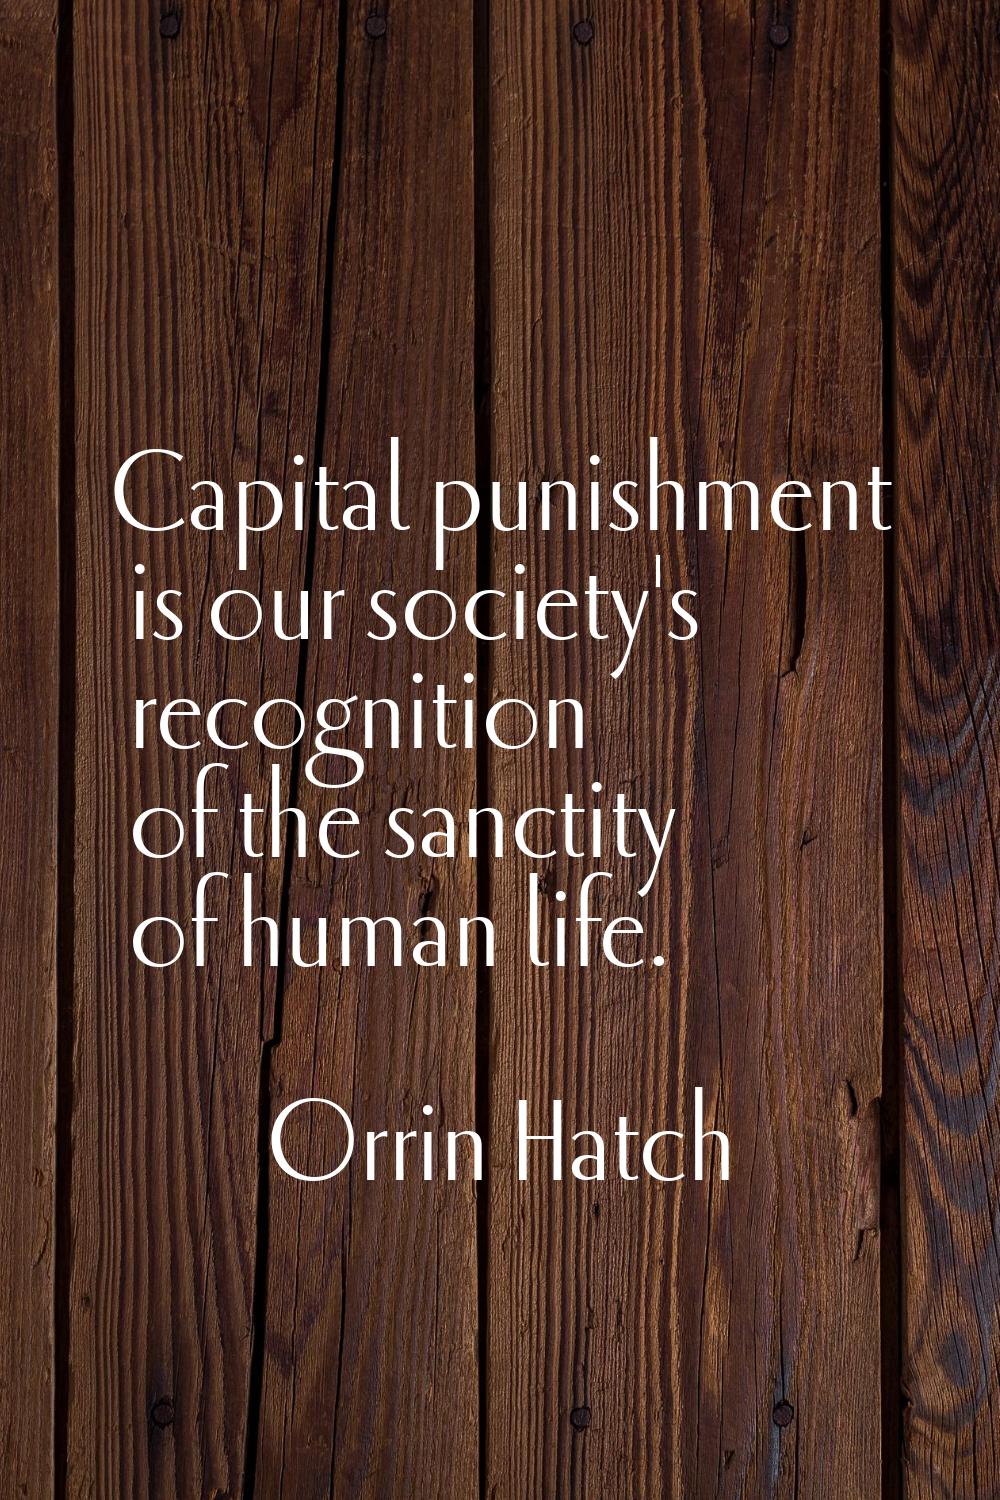 Capital punishment is our society's recognition of the sanctity of human life.